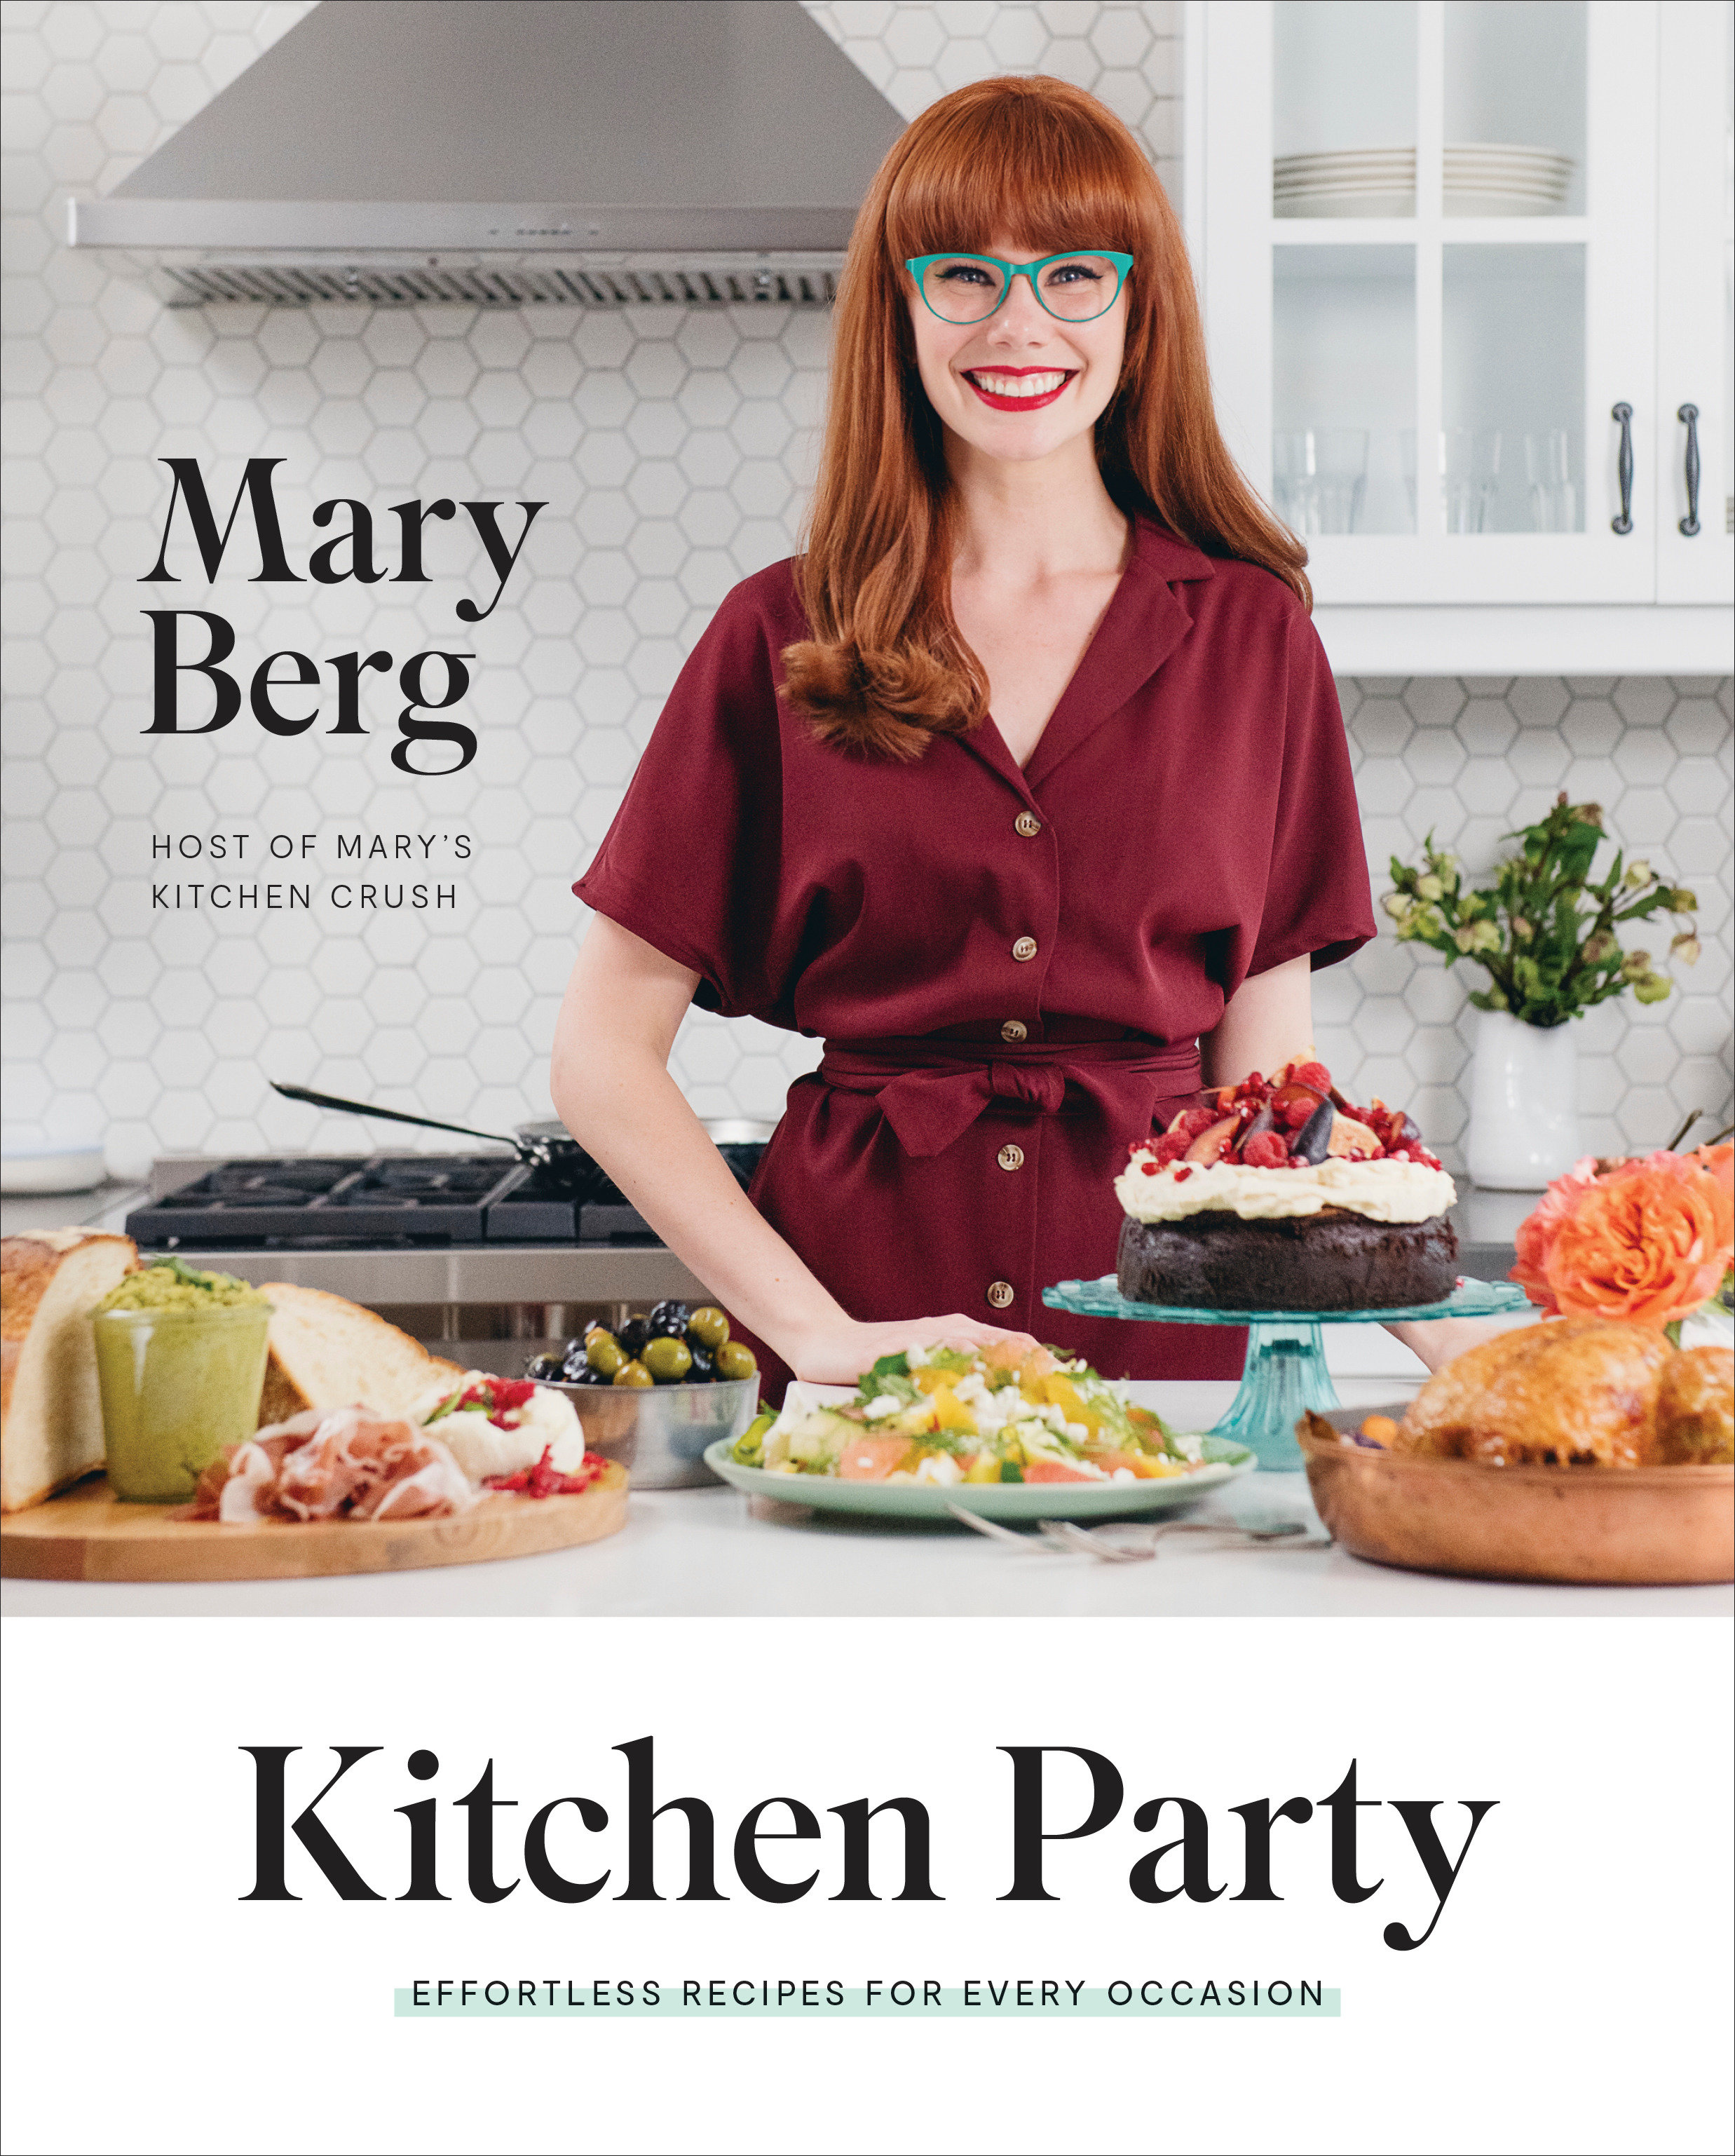 Kitchen Party (Hardcover Book)